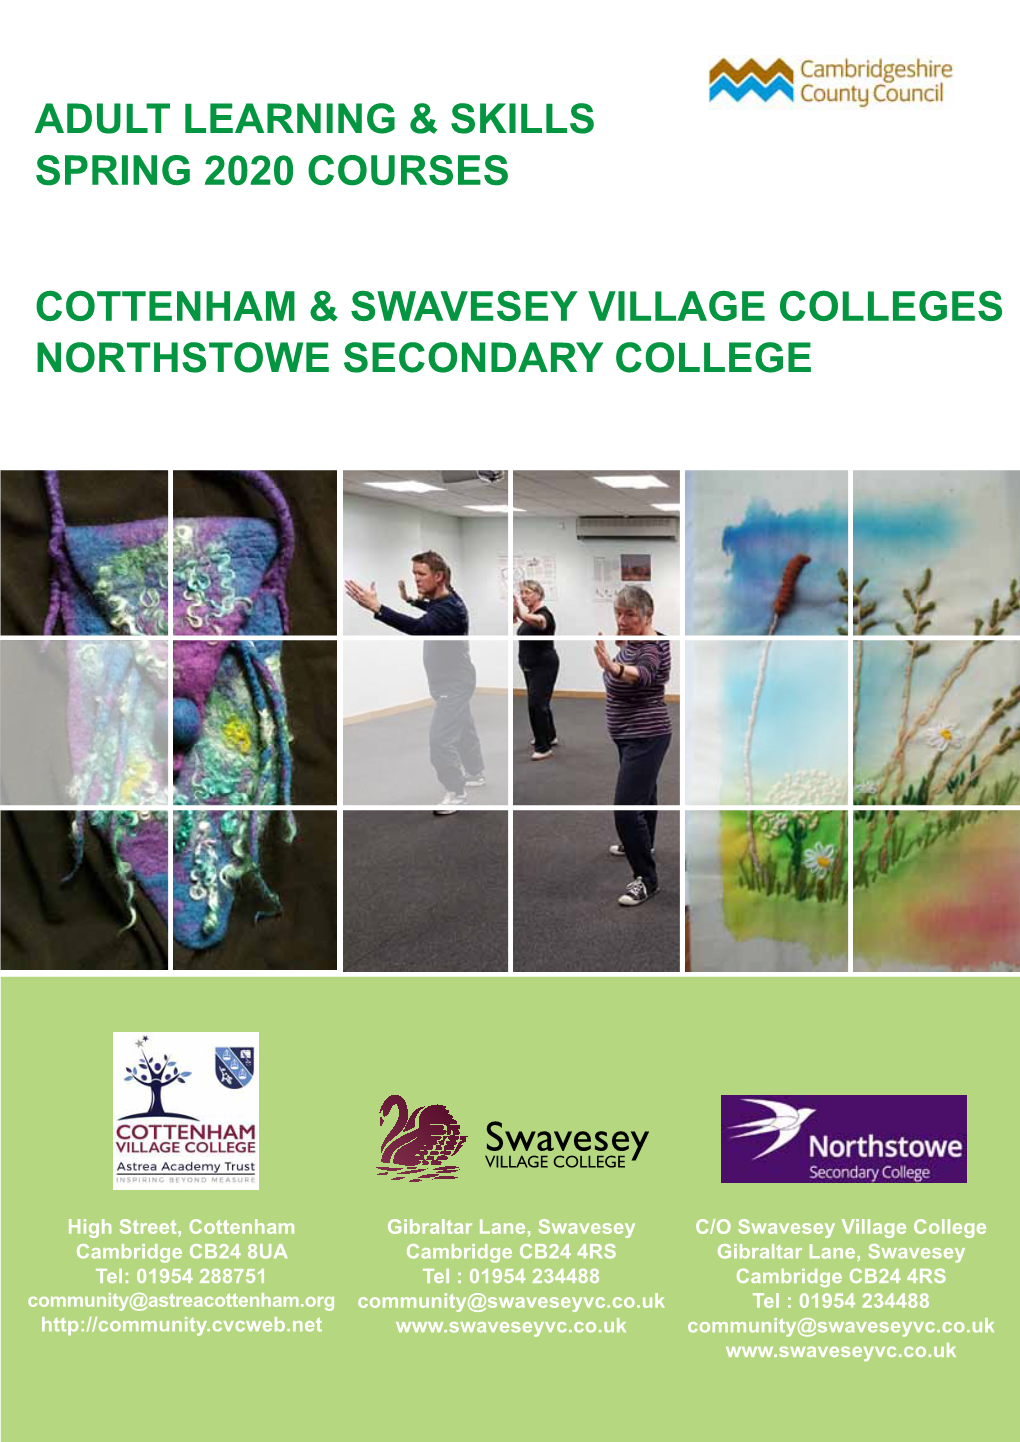 Swavesey Village Colleges Northstowe Secondary College